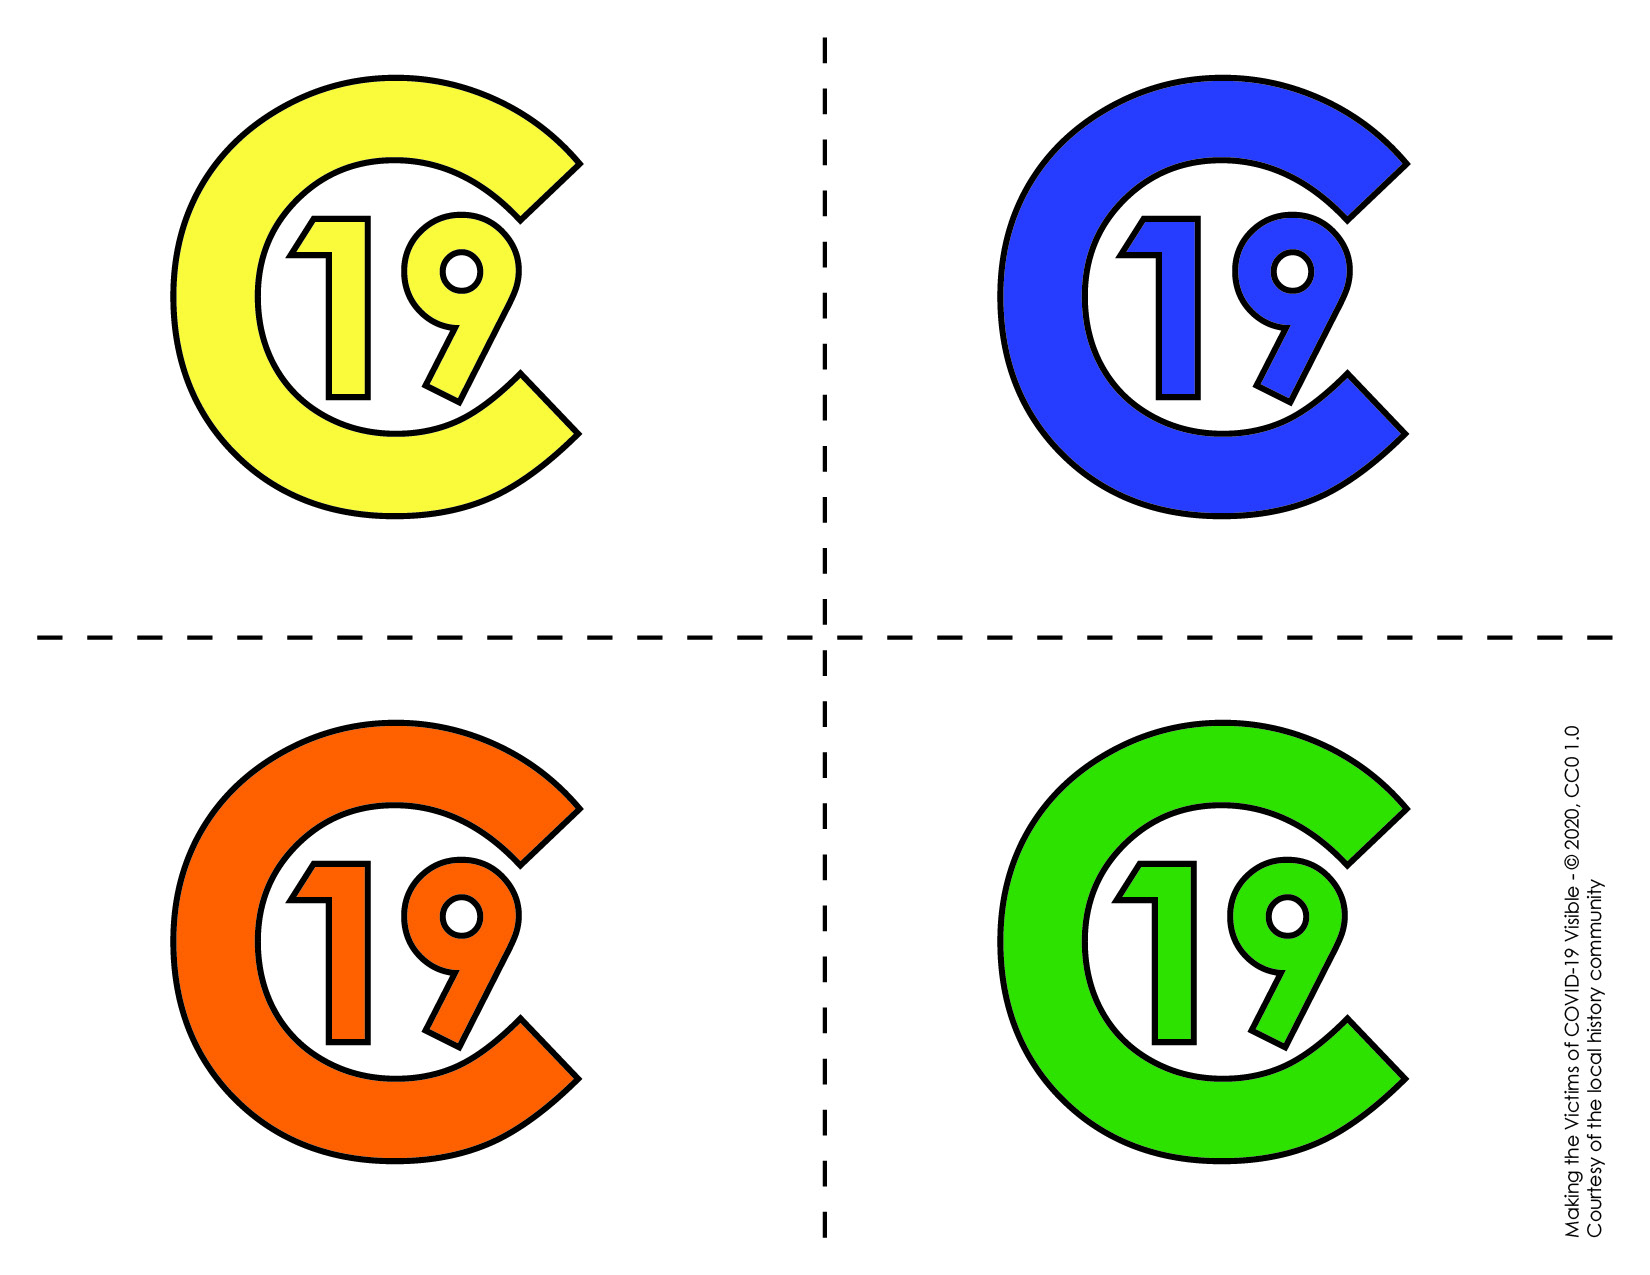 C-19 symbols for remembering those who have died of or survived COVID-19, May 27, 2020.